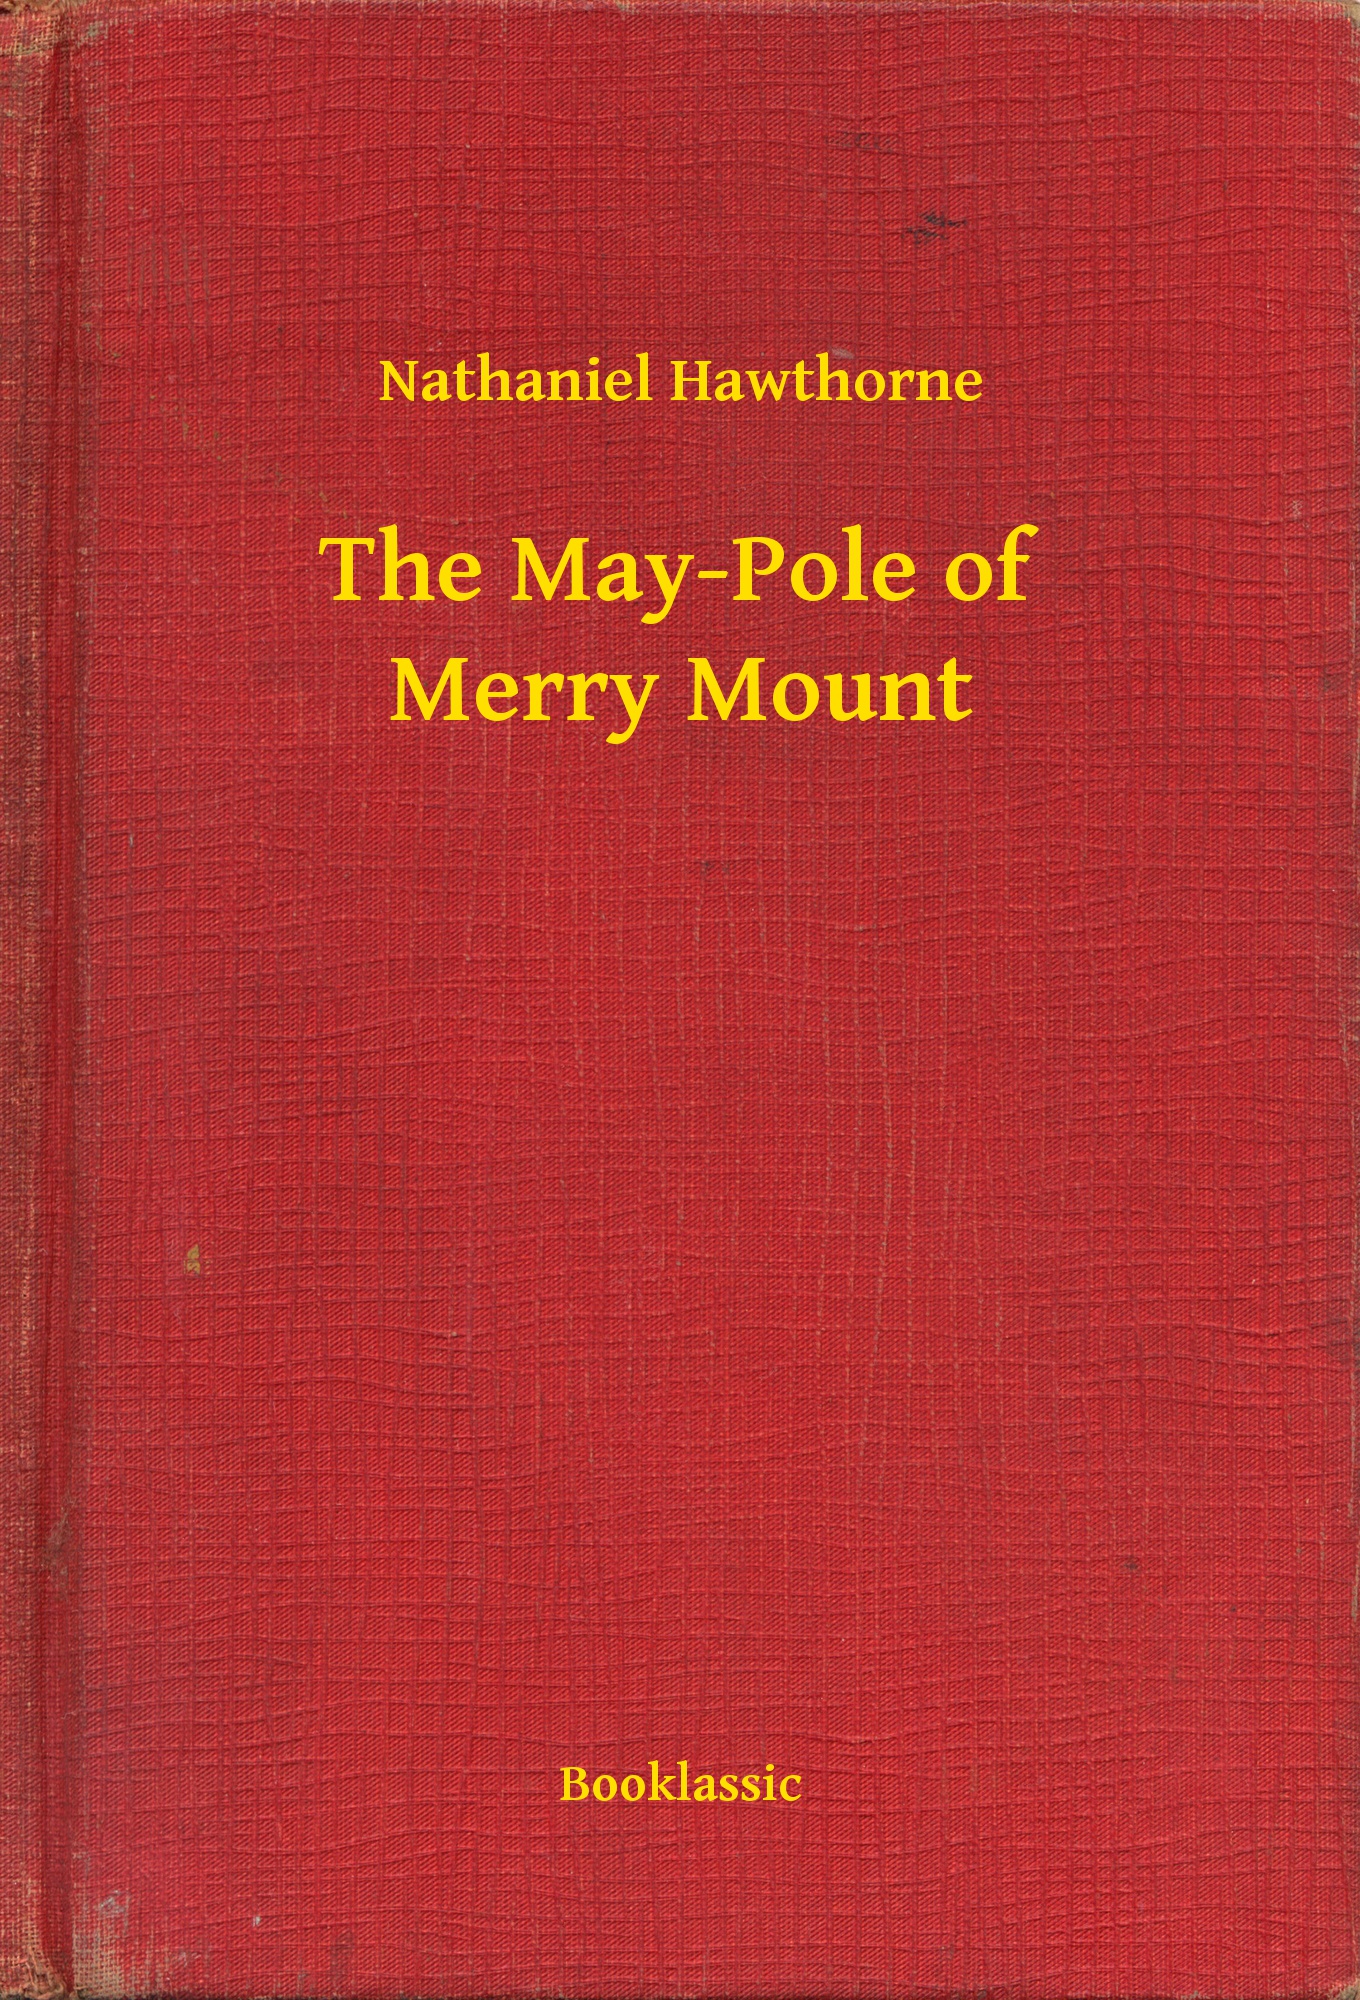 The May-Pole of Merry Mount